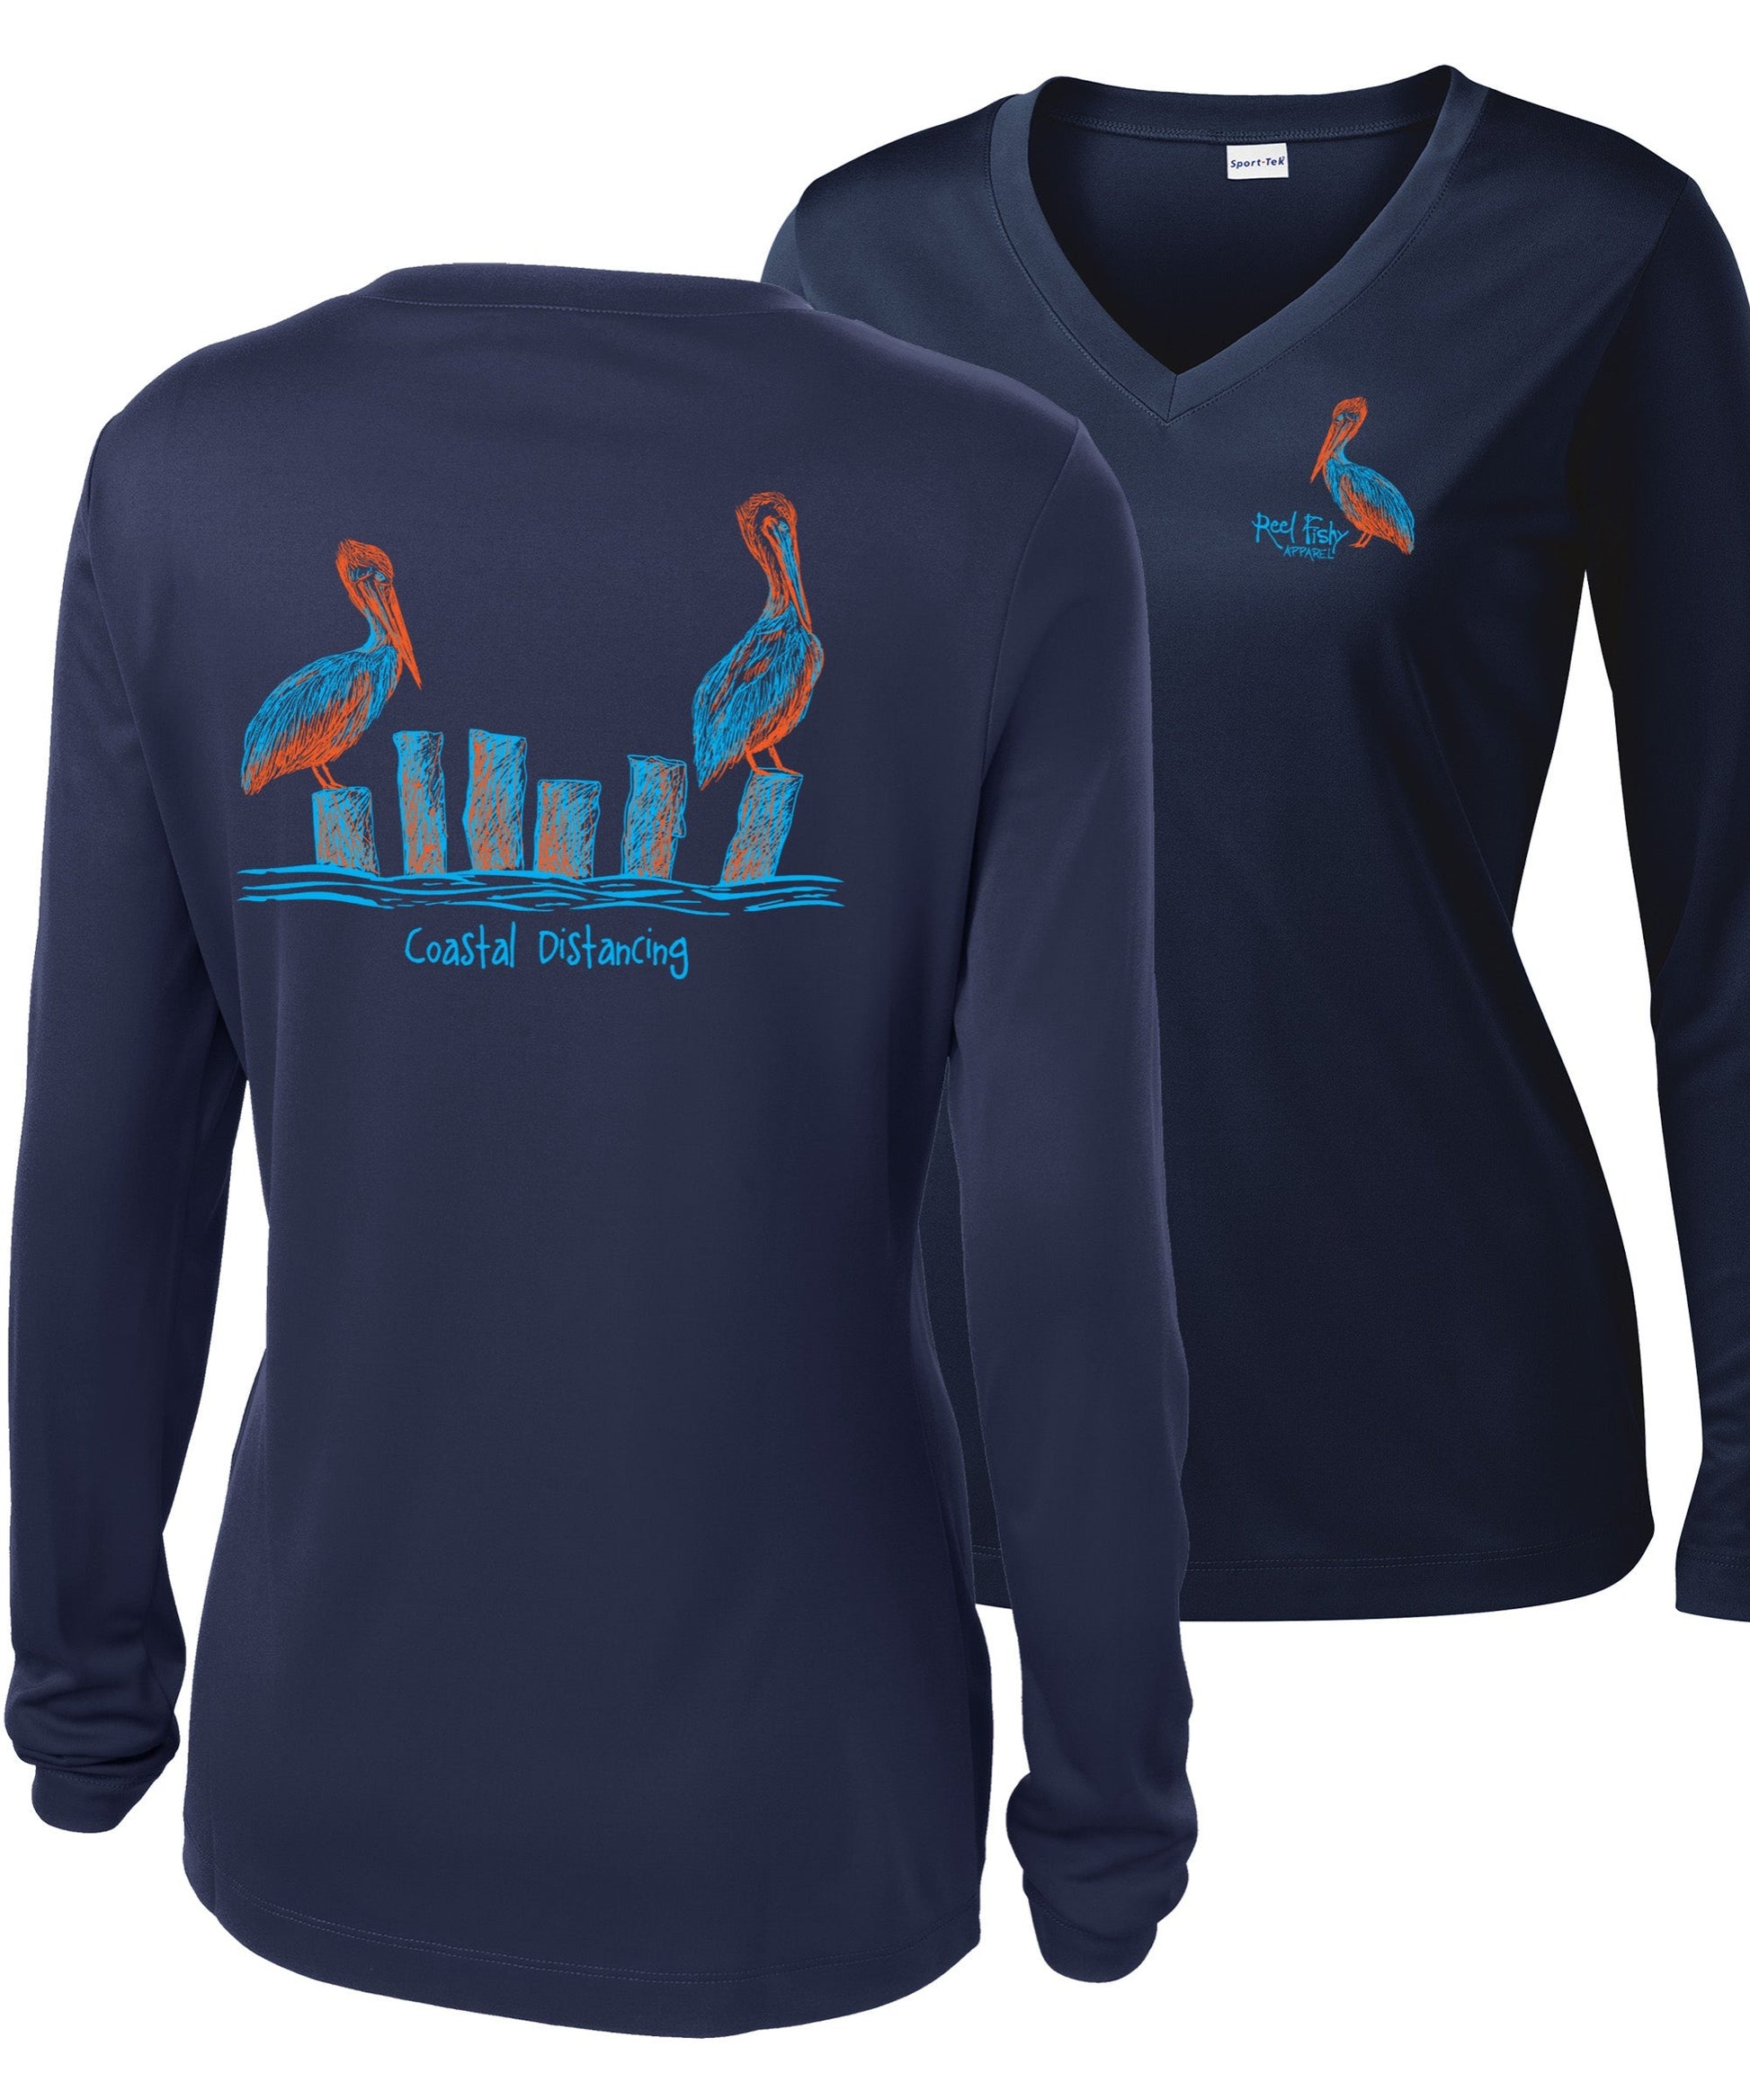 Ladies Pelicans Costal Distancing Performance V-neck Navy Long Sleeve